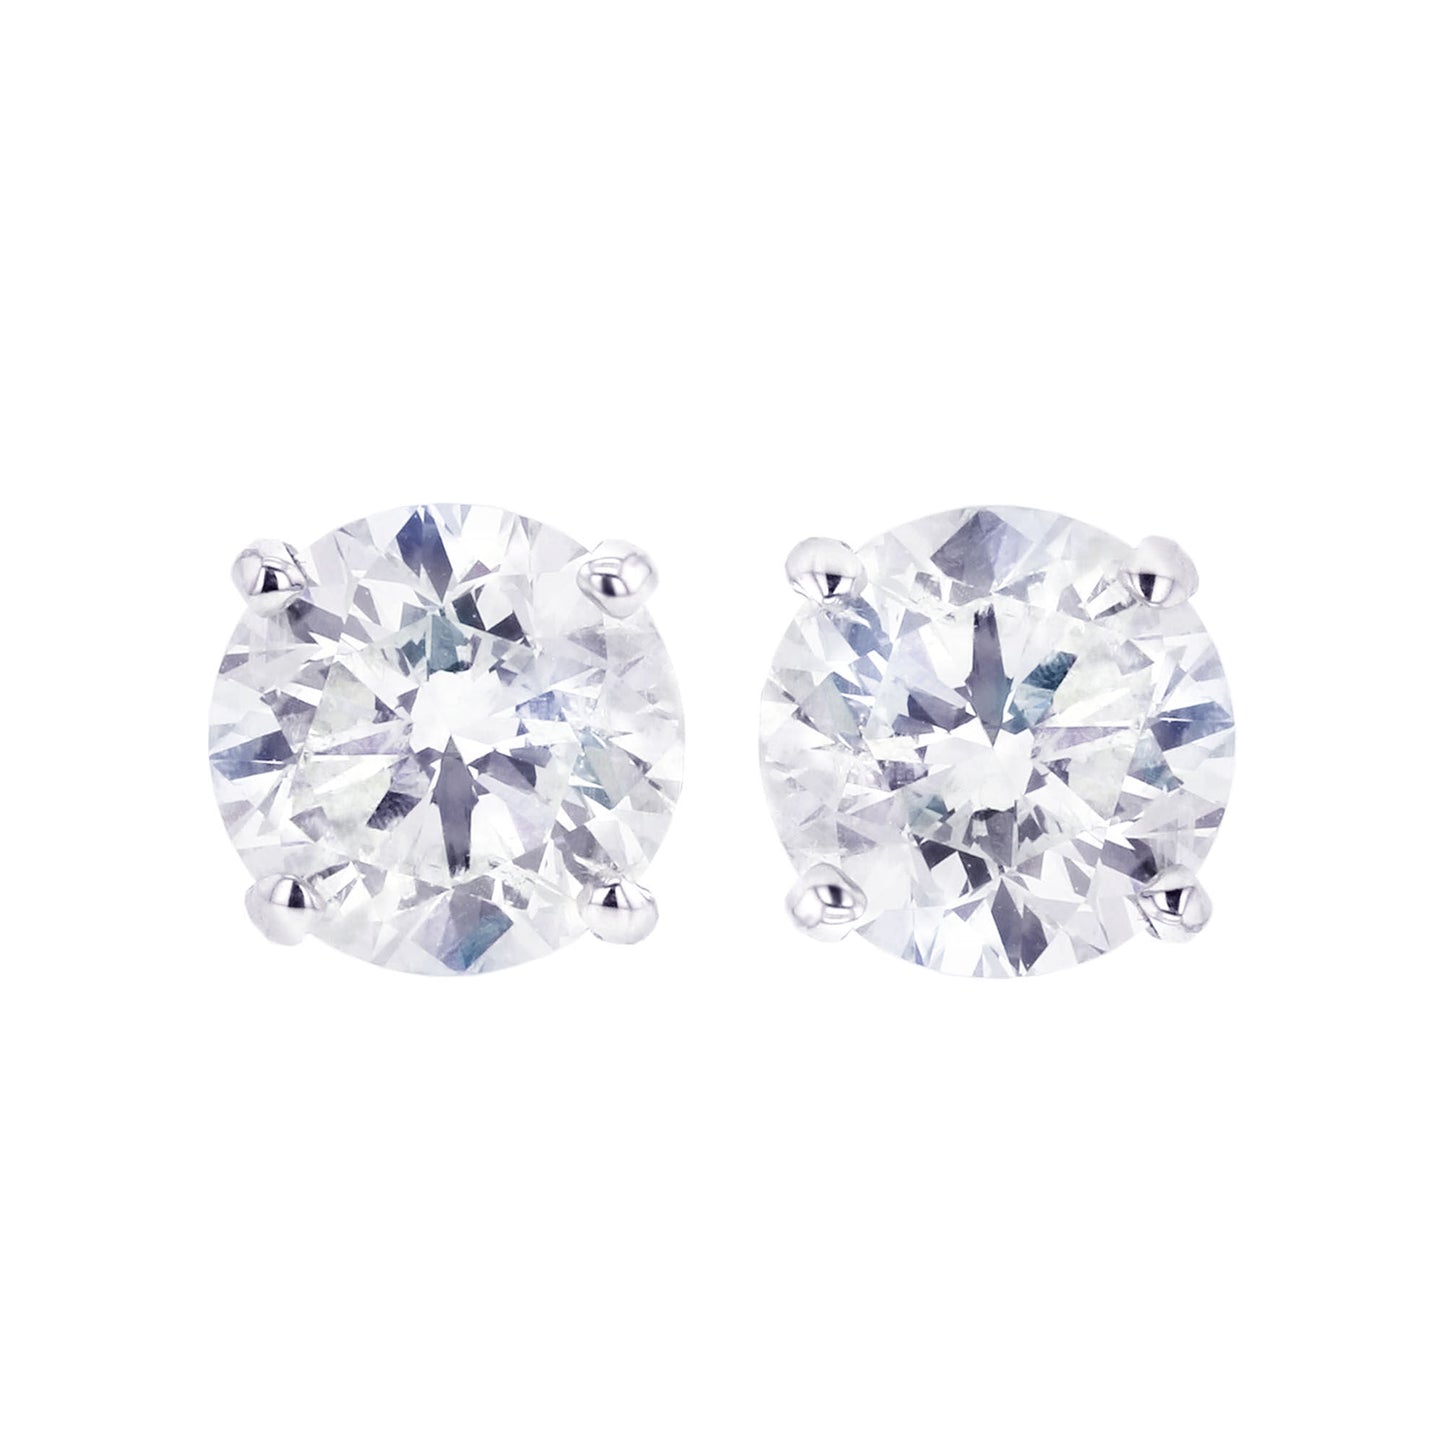 Our eye catching anita diamond studs for men and women.